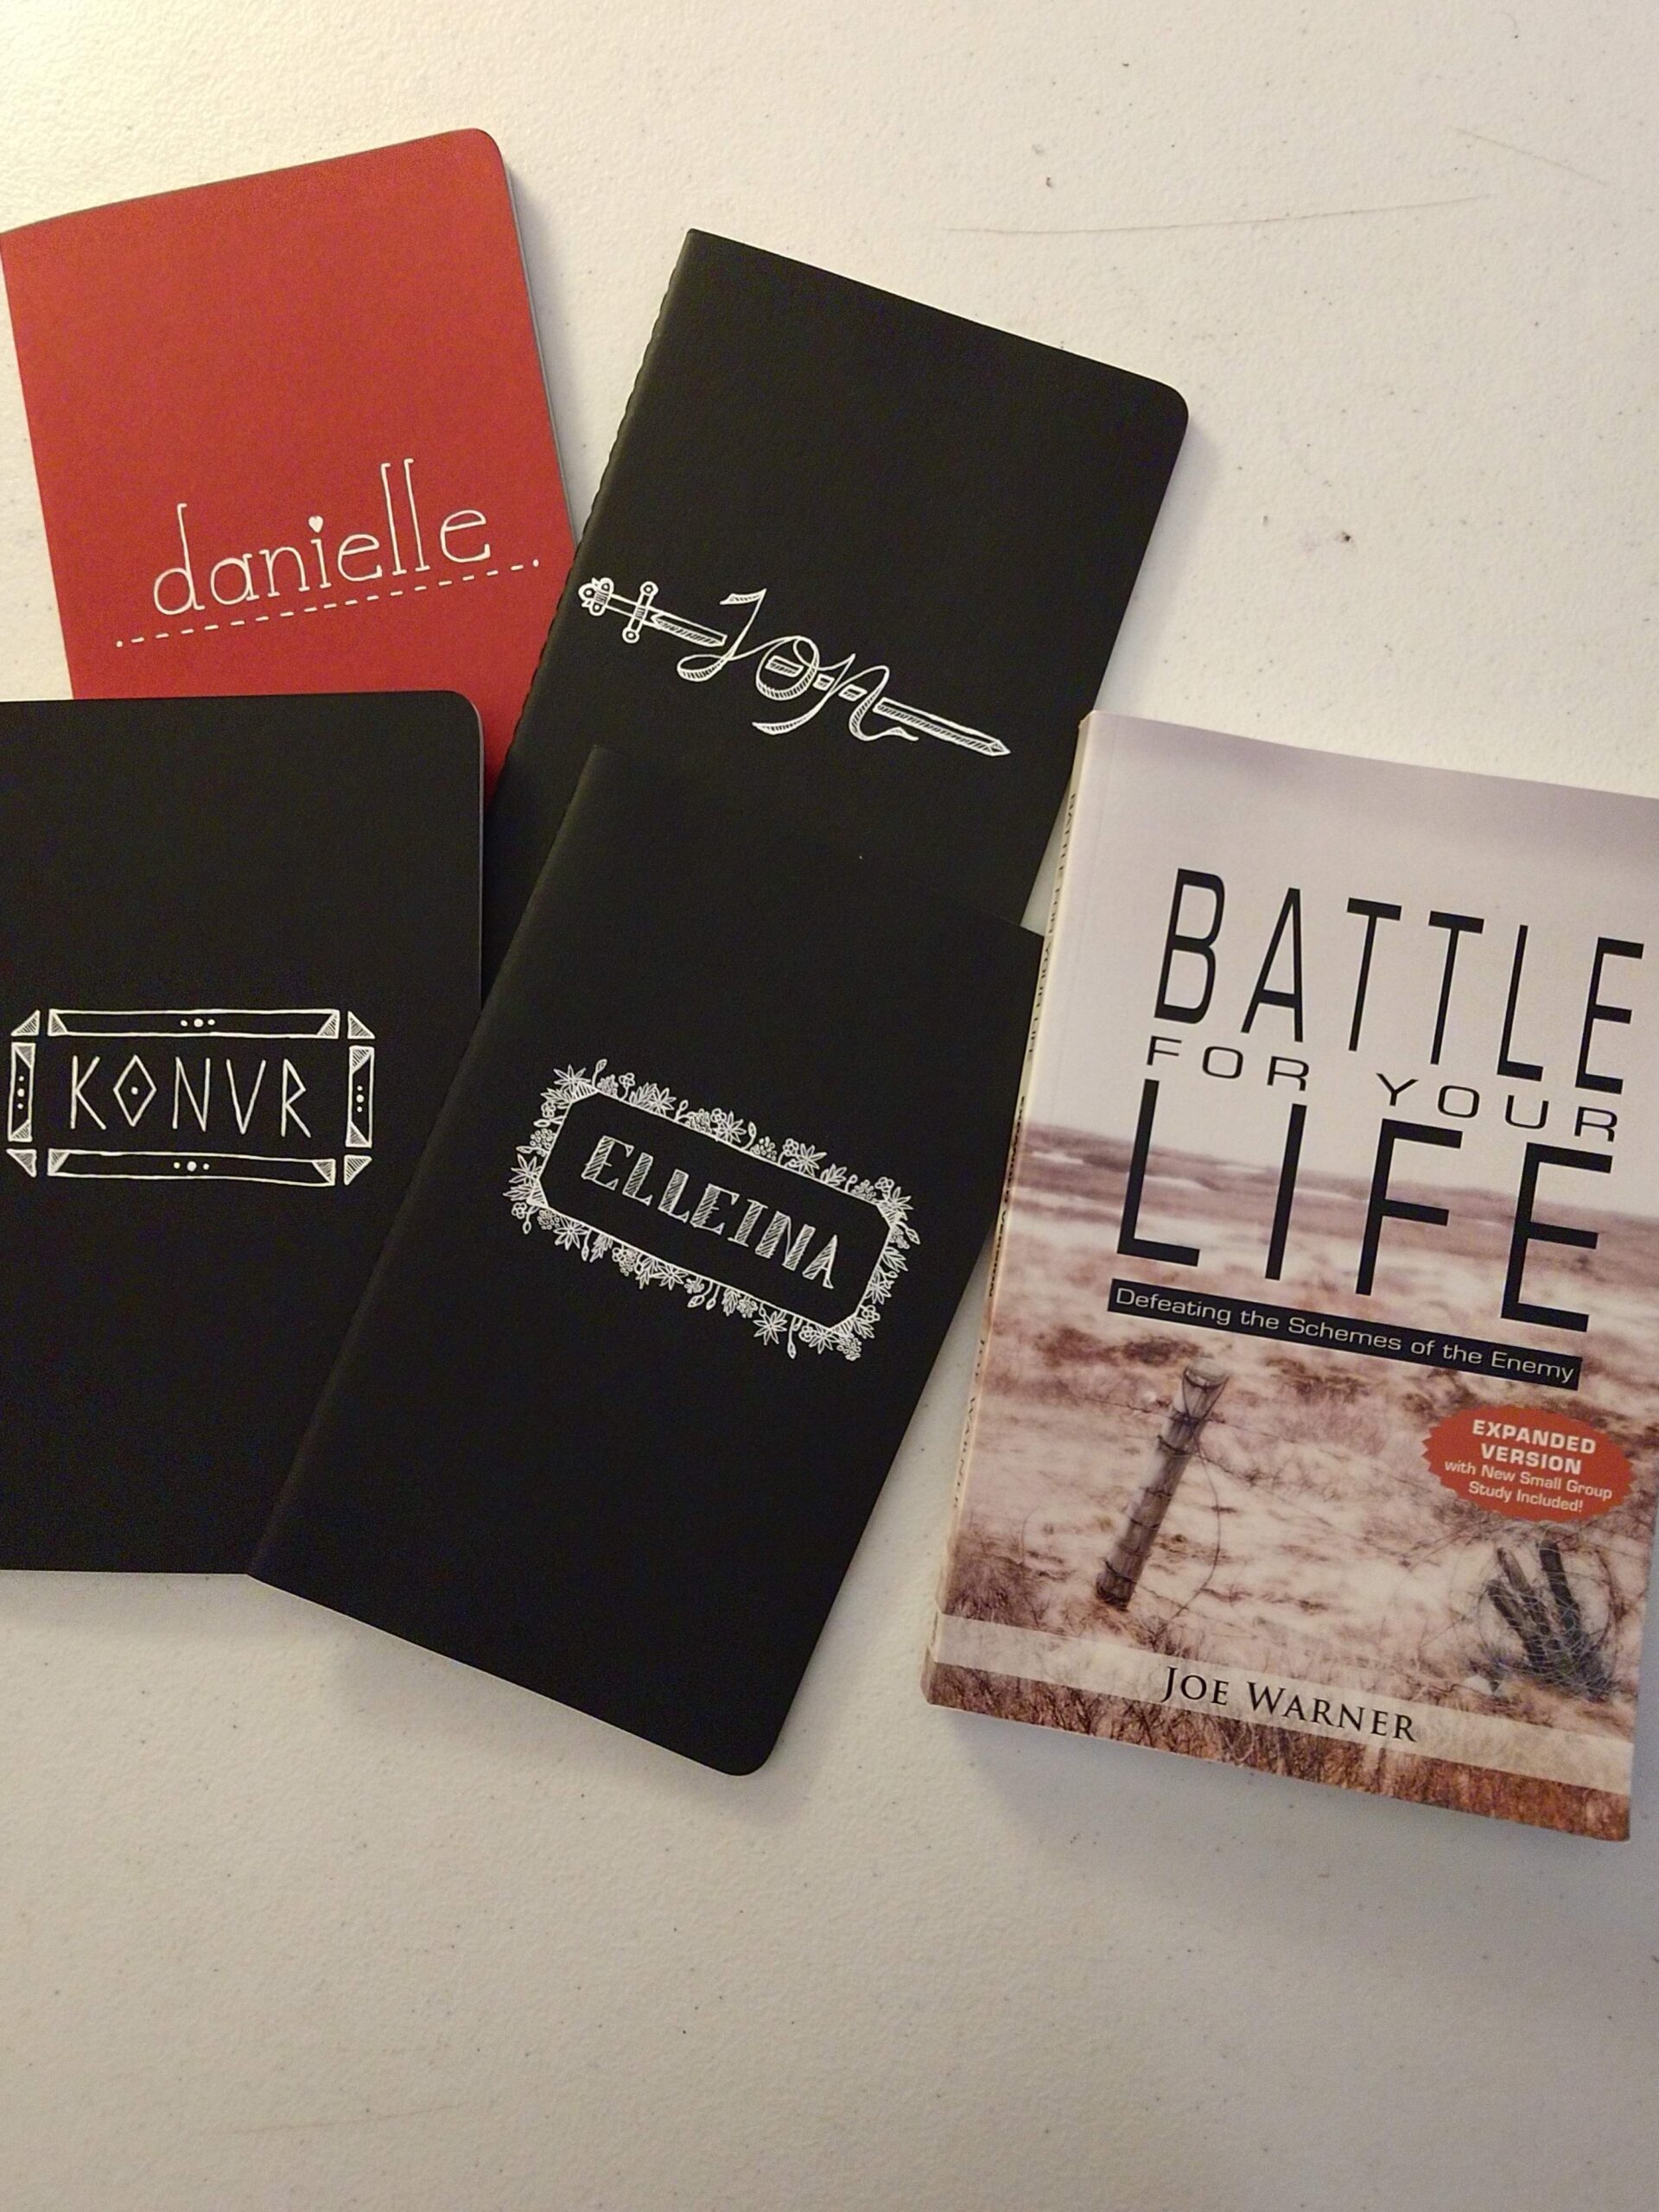 Journals with decorations drawn on the front next to a book called "Battle for your Life."